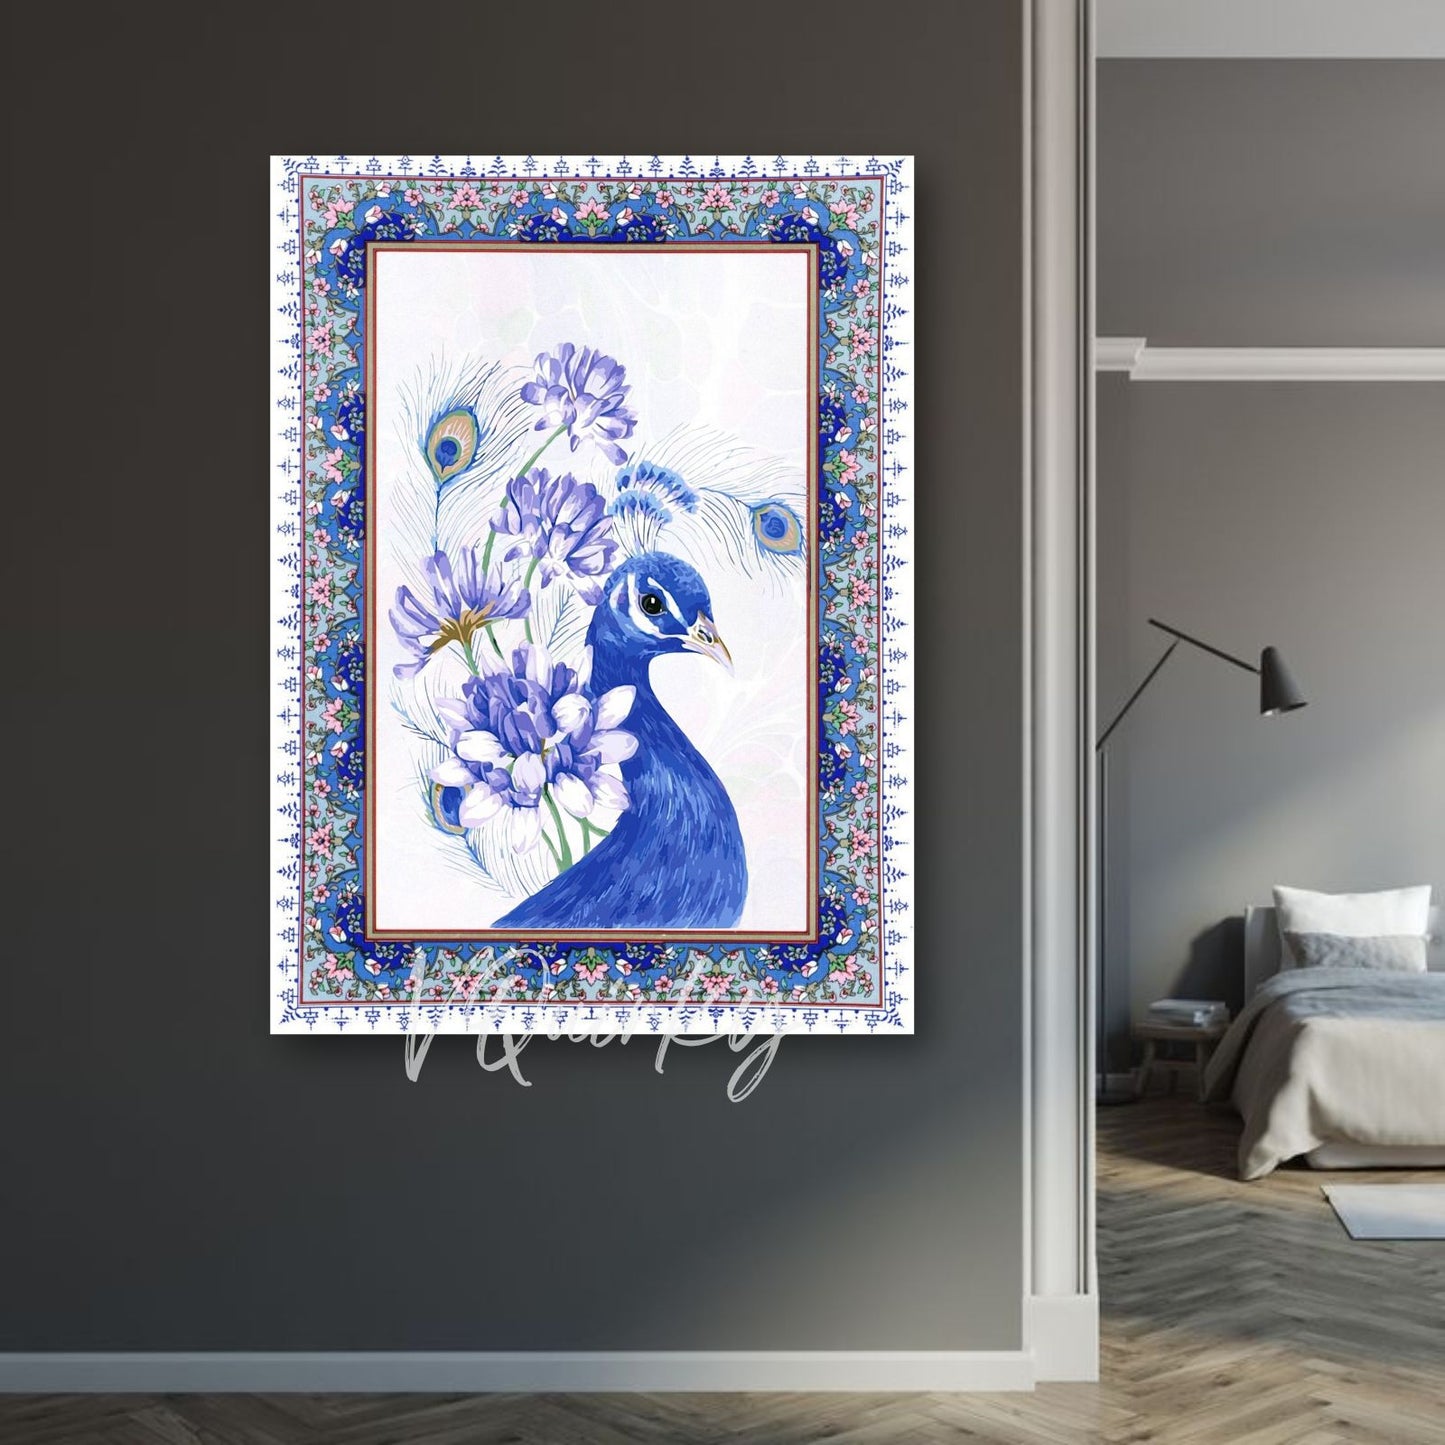 Traditional Beautiful Peacock Canvas Painting